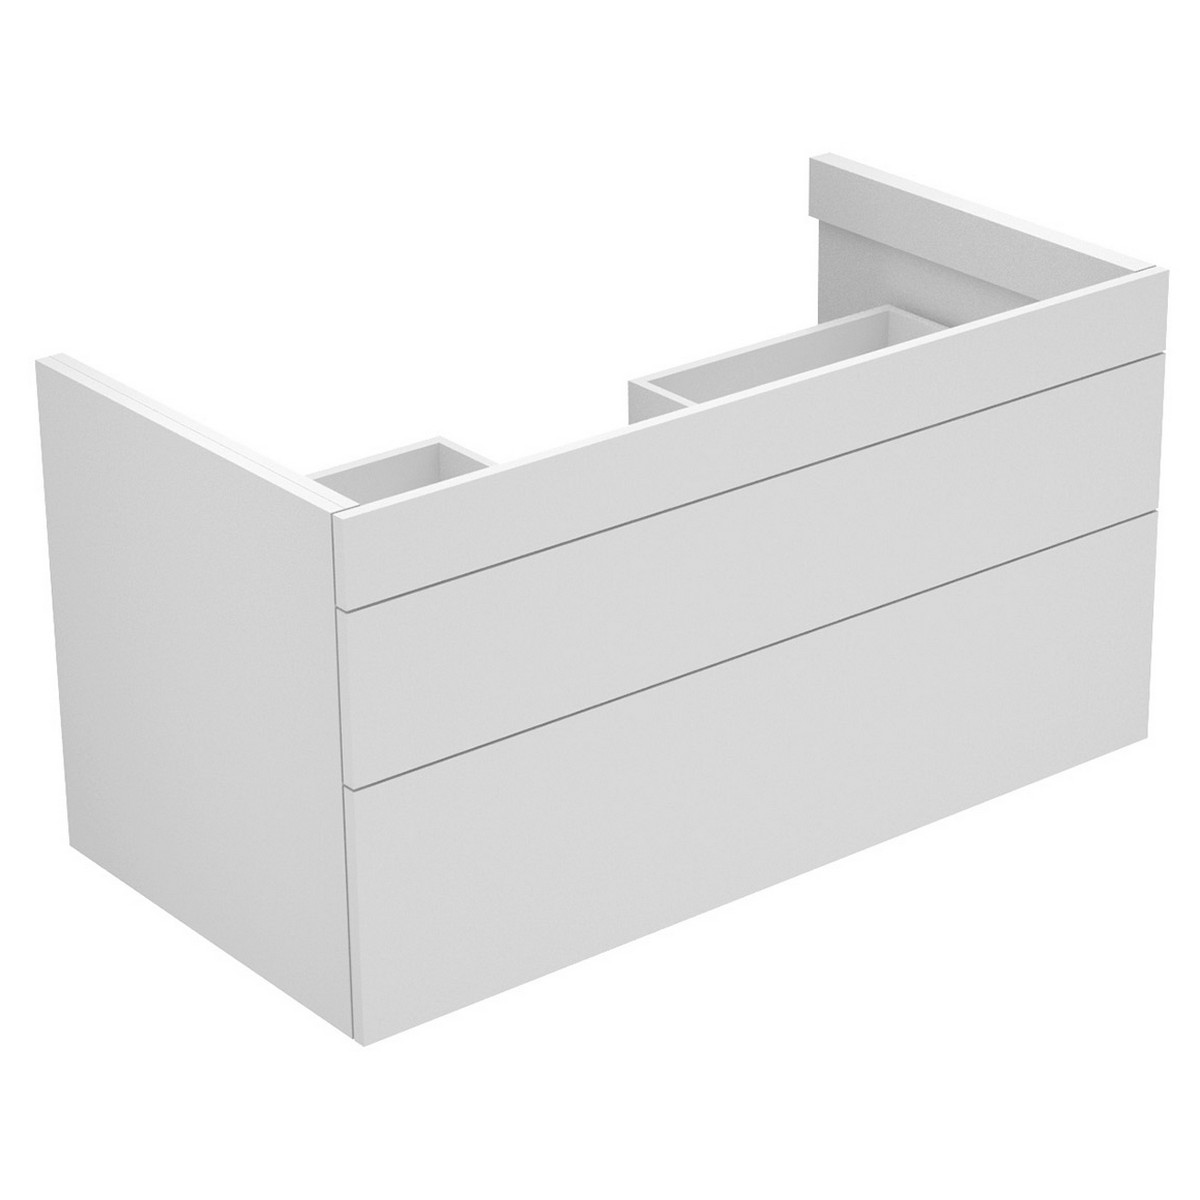 KEUCO 315510000 EDITION 400 41 3/8 INCH 2-DRAWERS WALL MOUNTED SINGLE SINK BATHROOM VANITY CABINET ONLY